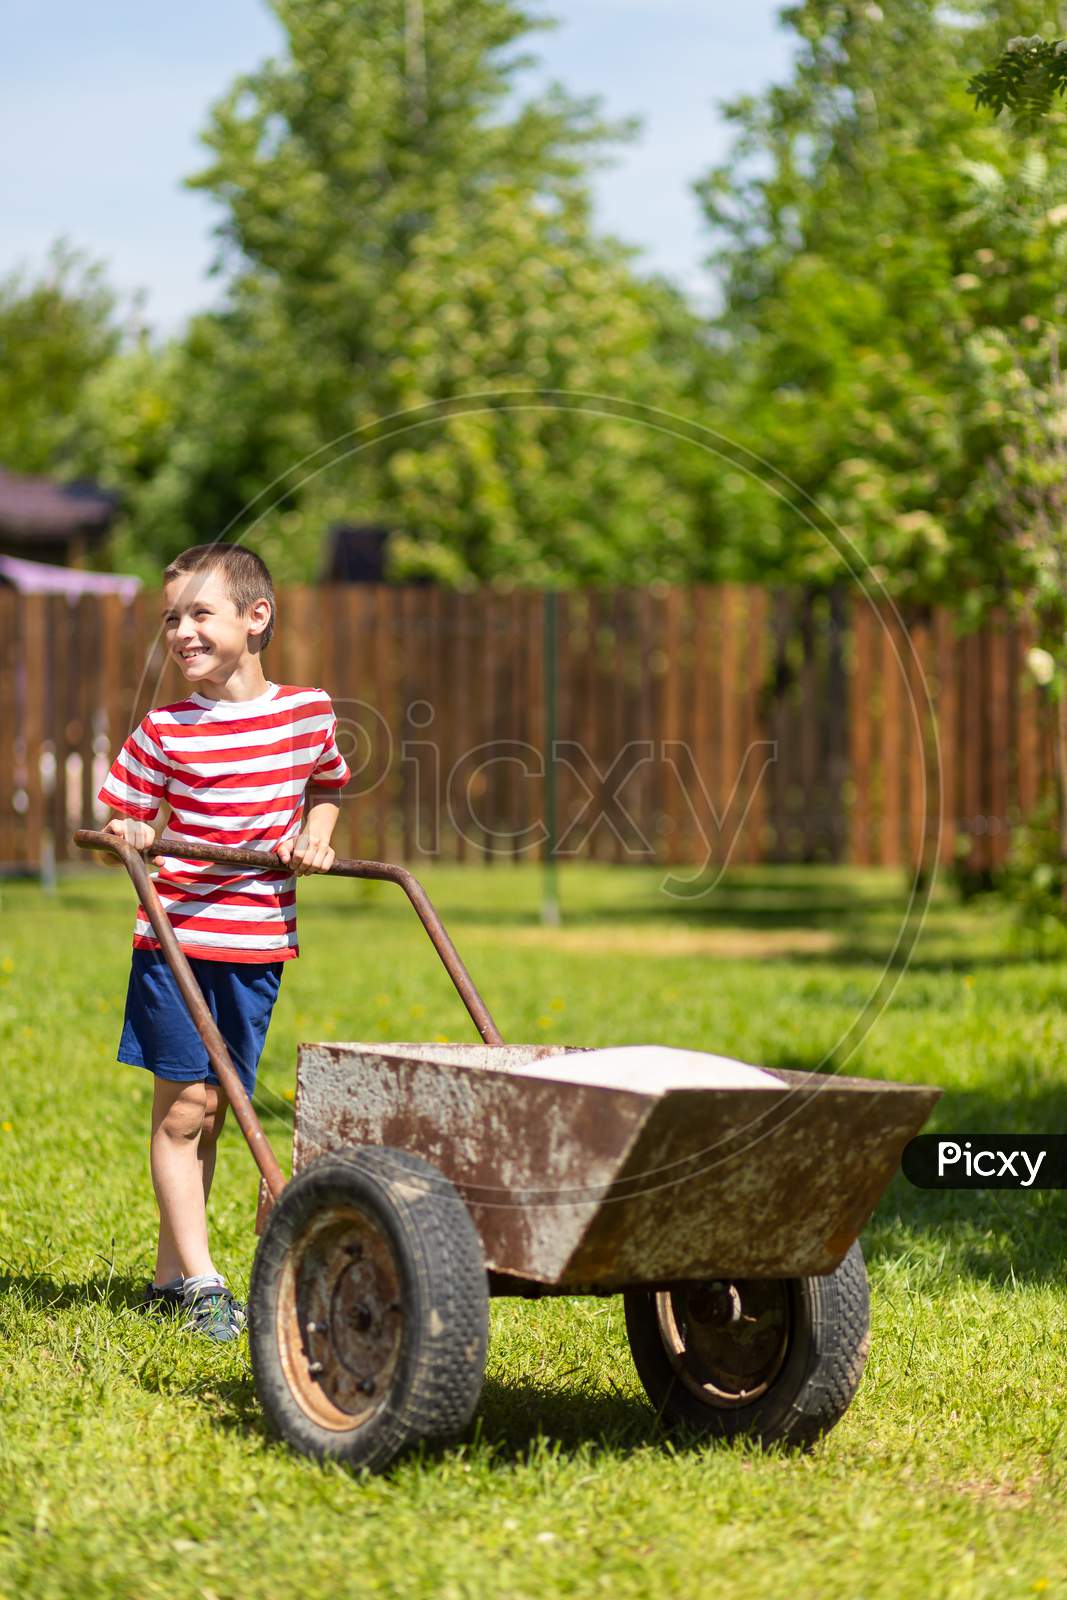 A Little Boy Drives A Wheelbarrow With Bags On A Sunny Day In The Garden. Boy Assistant In The Garden